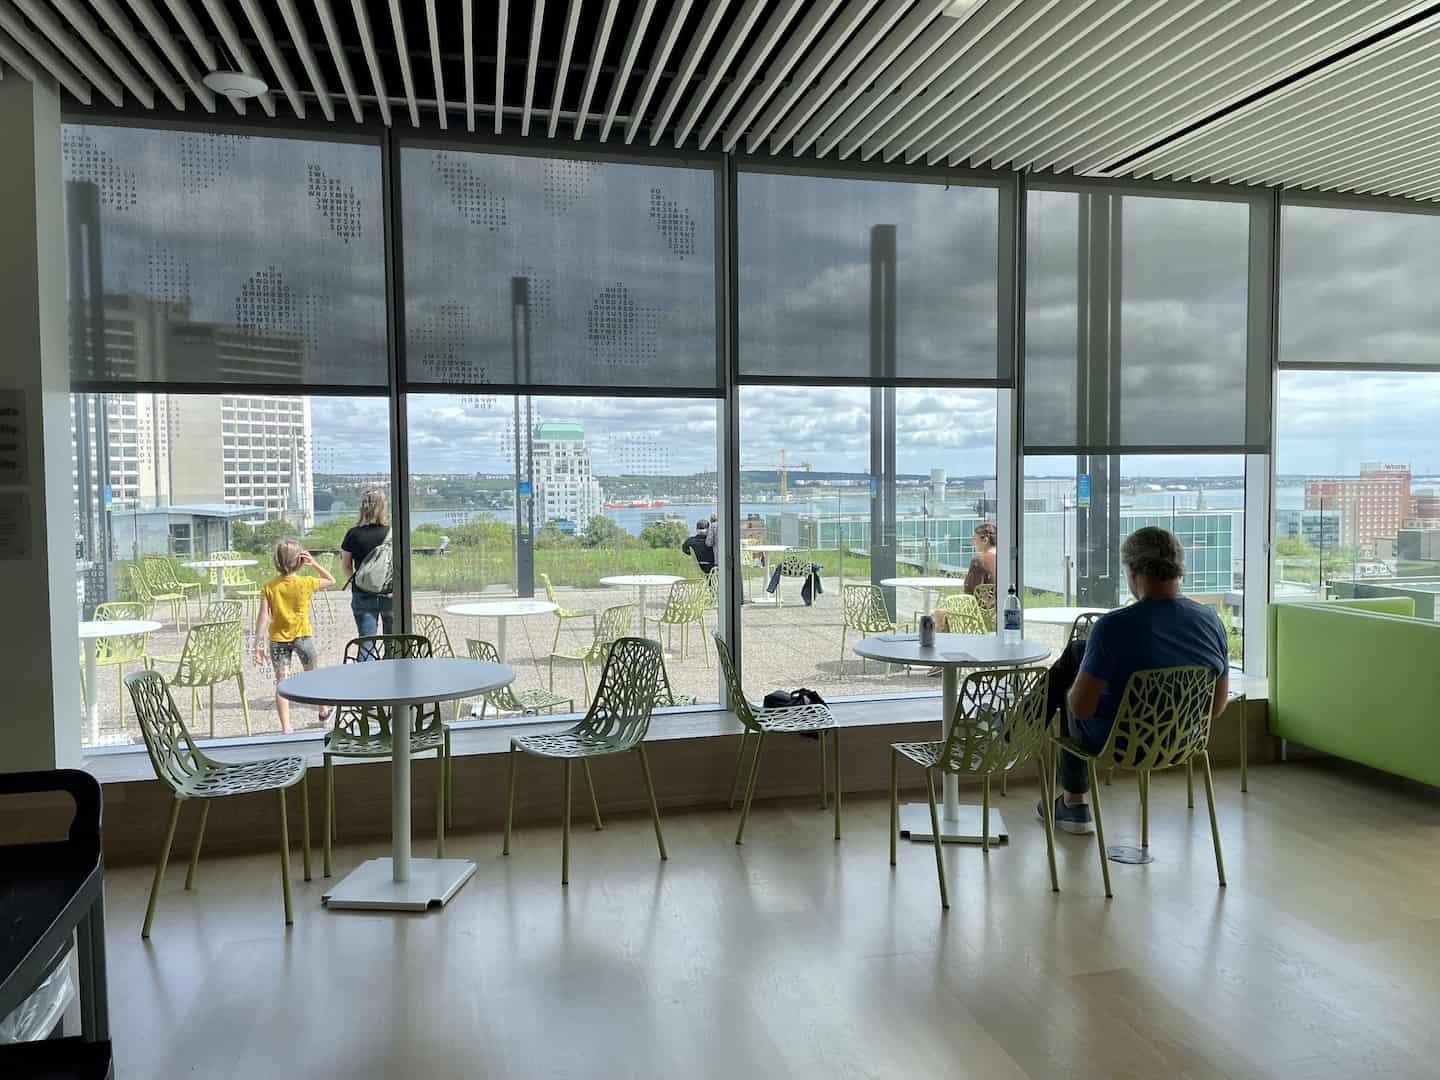 A man sits at a table in a cafe while others walk out on the rooftop deck at the Halifax Public Library.